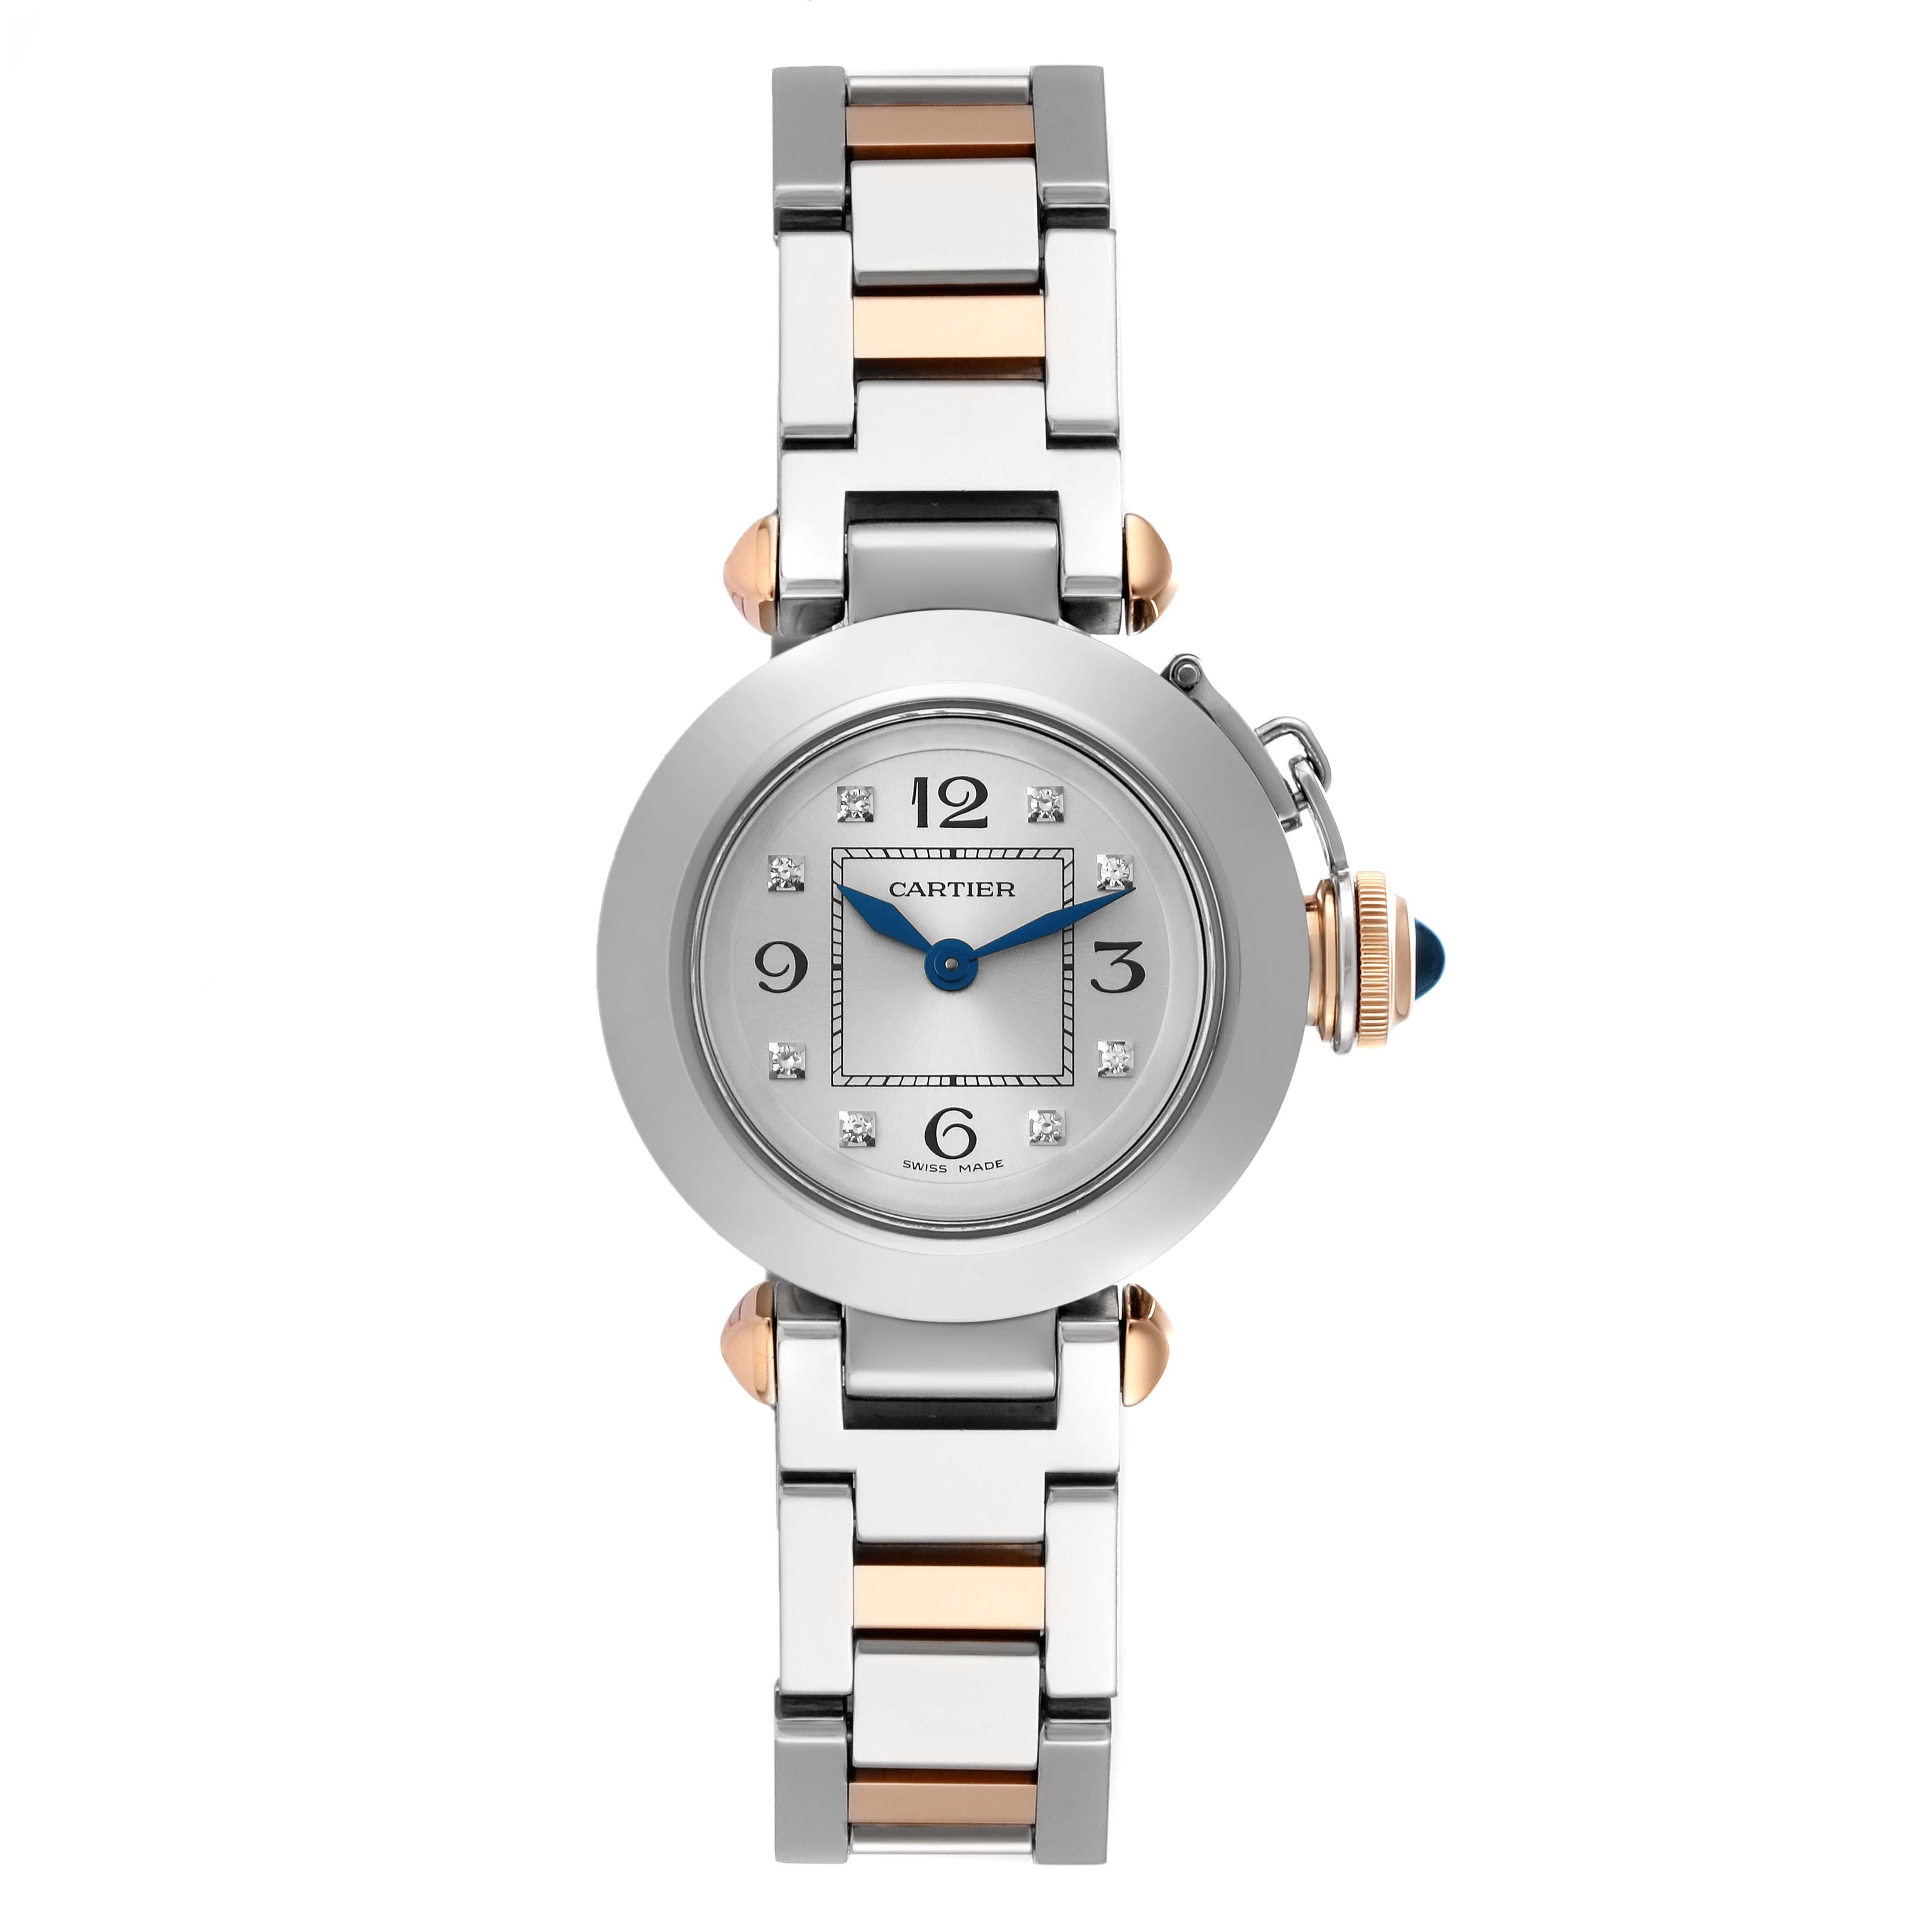 Cartier Miss Pasha Steel Rose Gold Diamond Dial Ladies Watch WJ124020 Papers. Quartz movement. Round three-body polished and brushed stainless steel case 27.0 mm in diameter. Vendome lugs. 18k rose gold winding-crown protection cap set with the blue